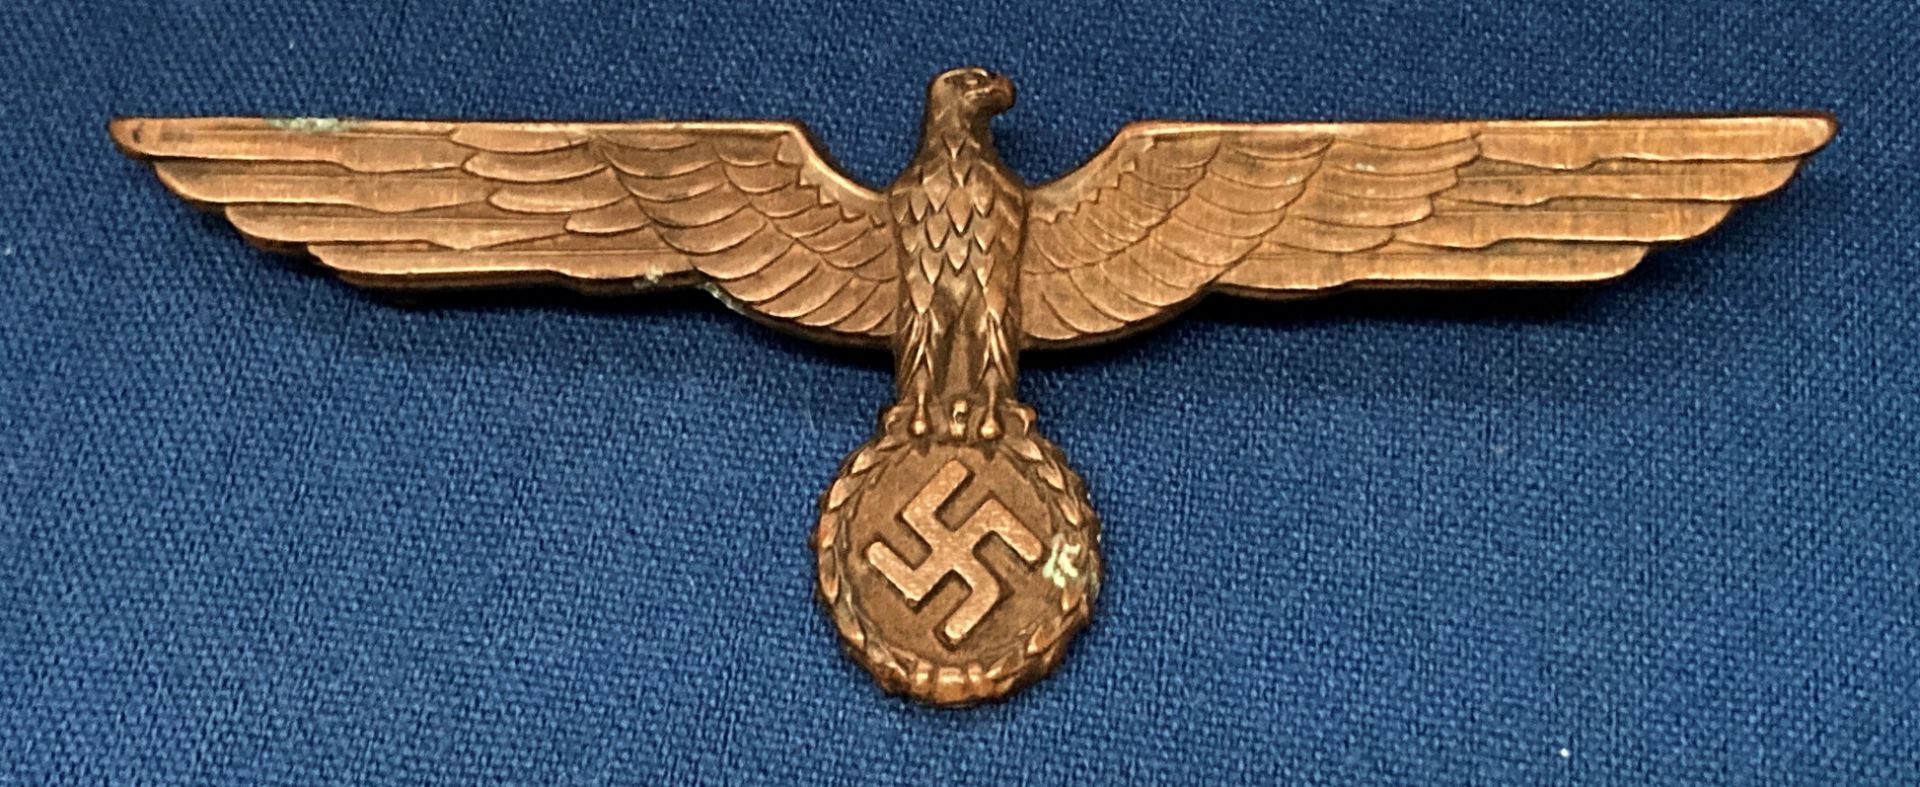 Two Nazi Party brass badges (Saleroom location: S3 GC1) - Image 4 of 5